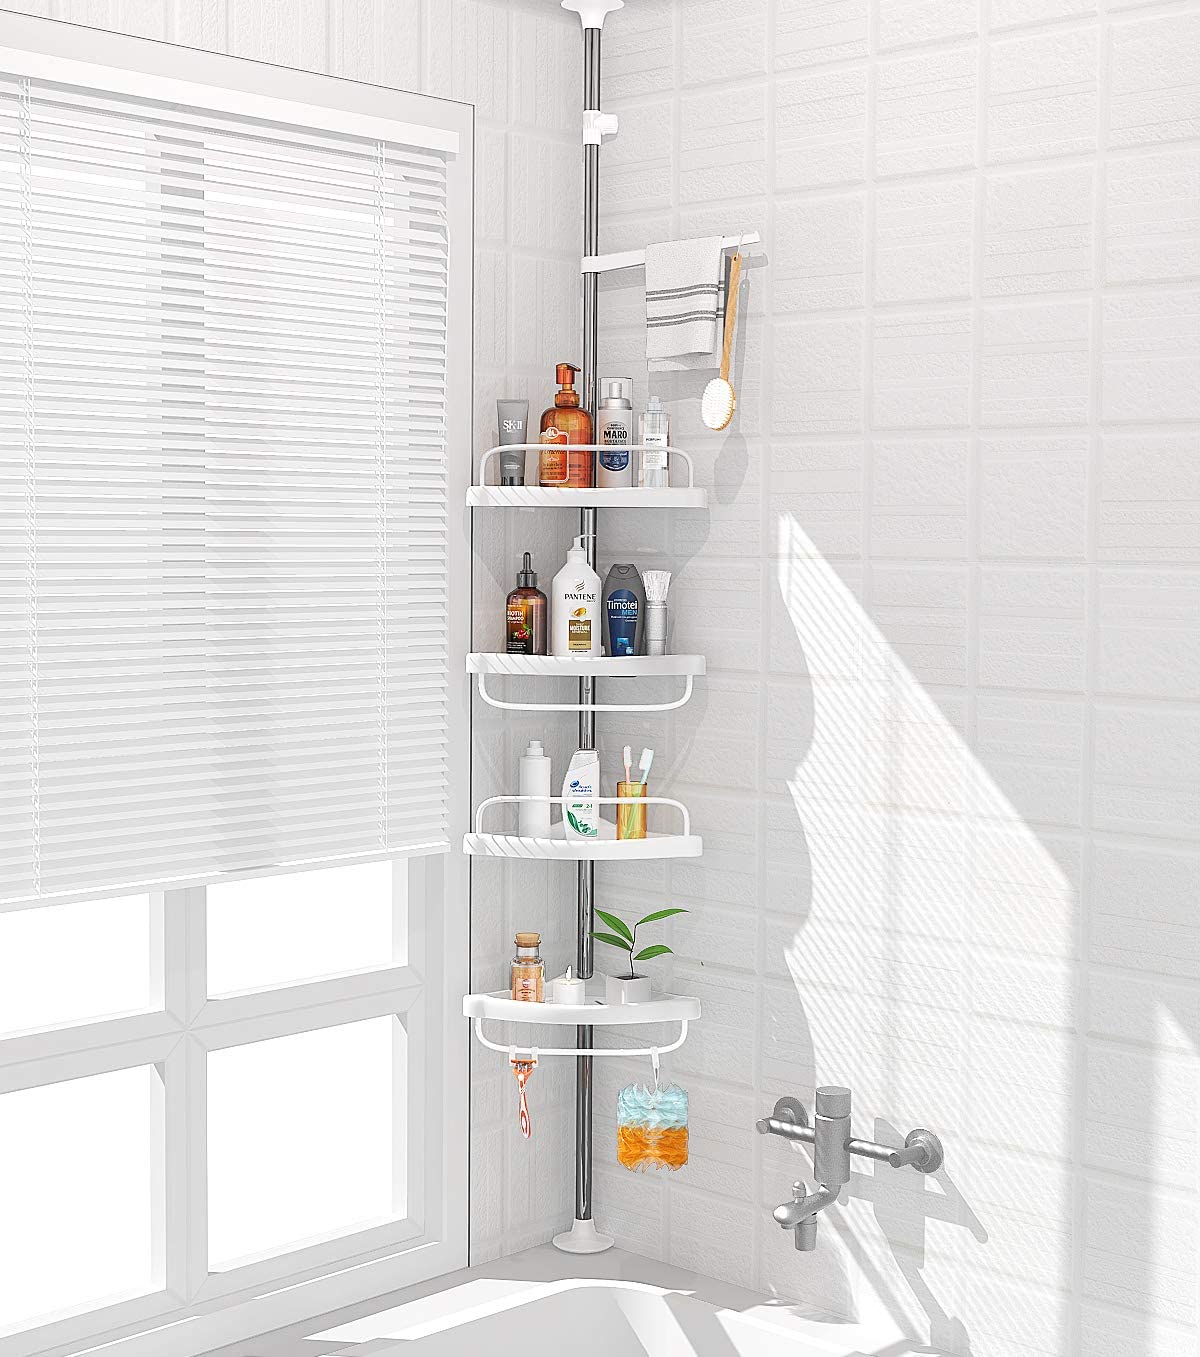 3 ½ Innovative Shower Storage Products for a Luxury Bathroom